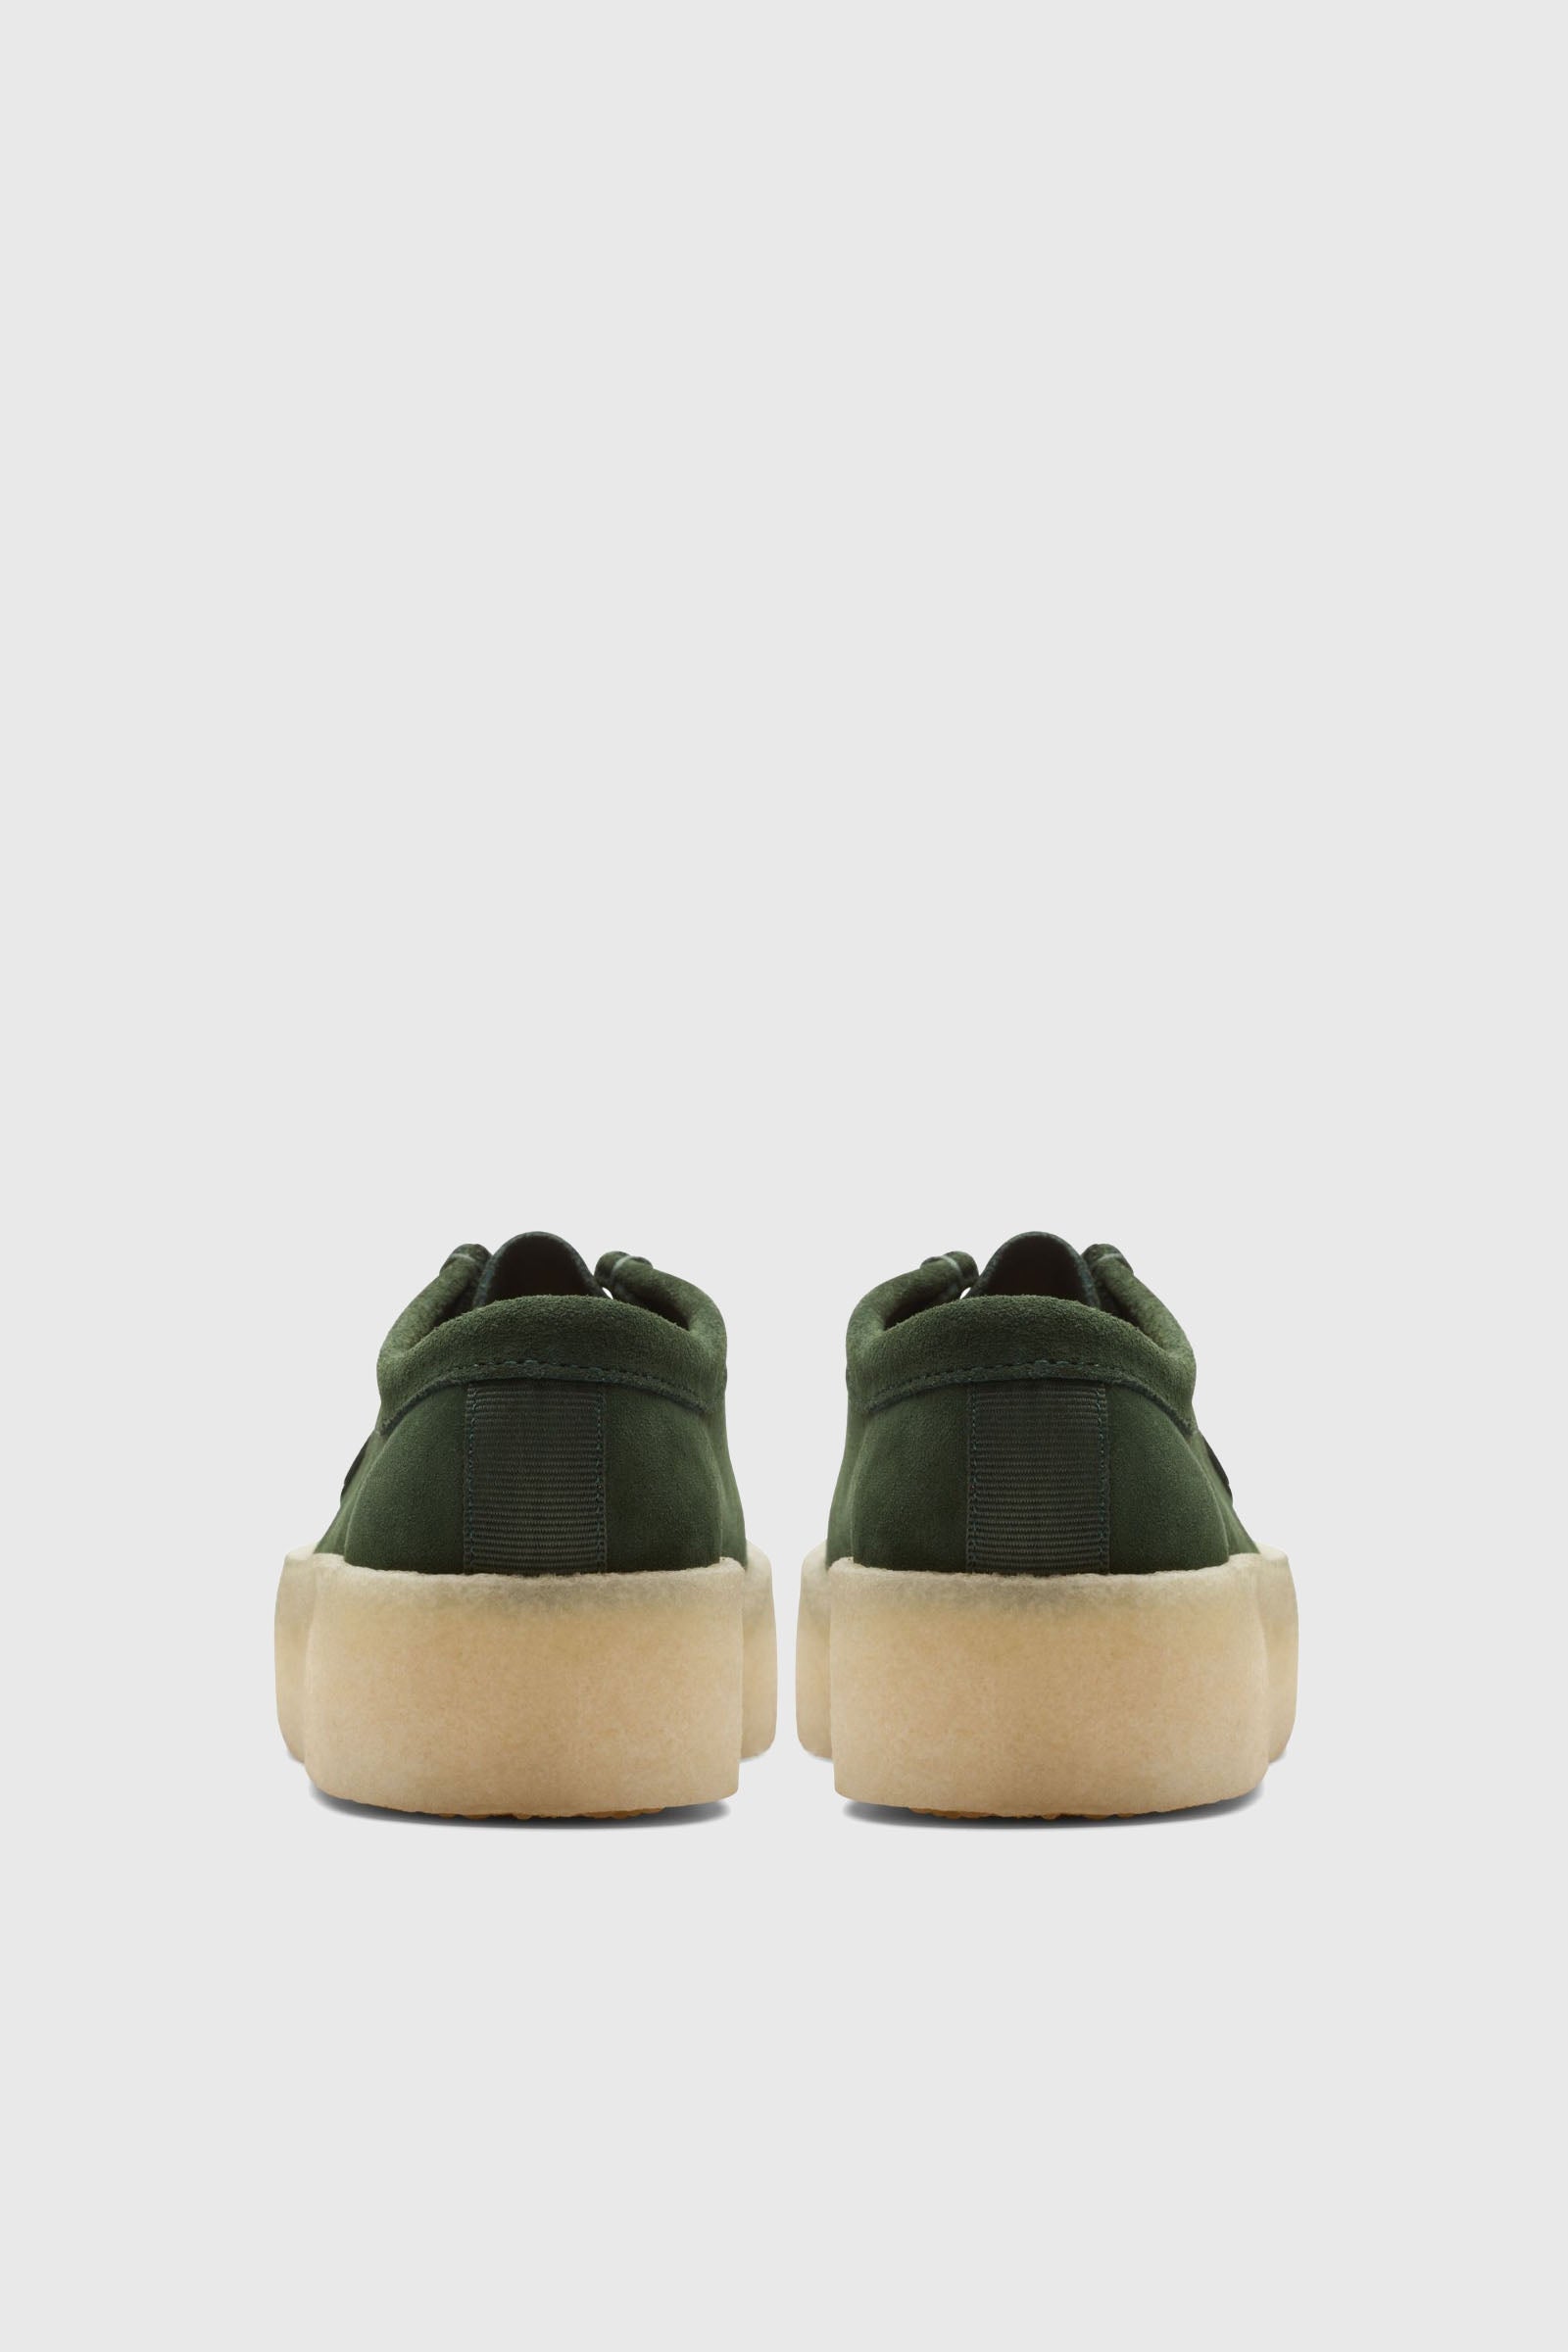 Clarks Wallabee Cup Leather Shoes in Dark Green/Dark Green - 5